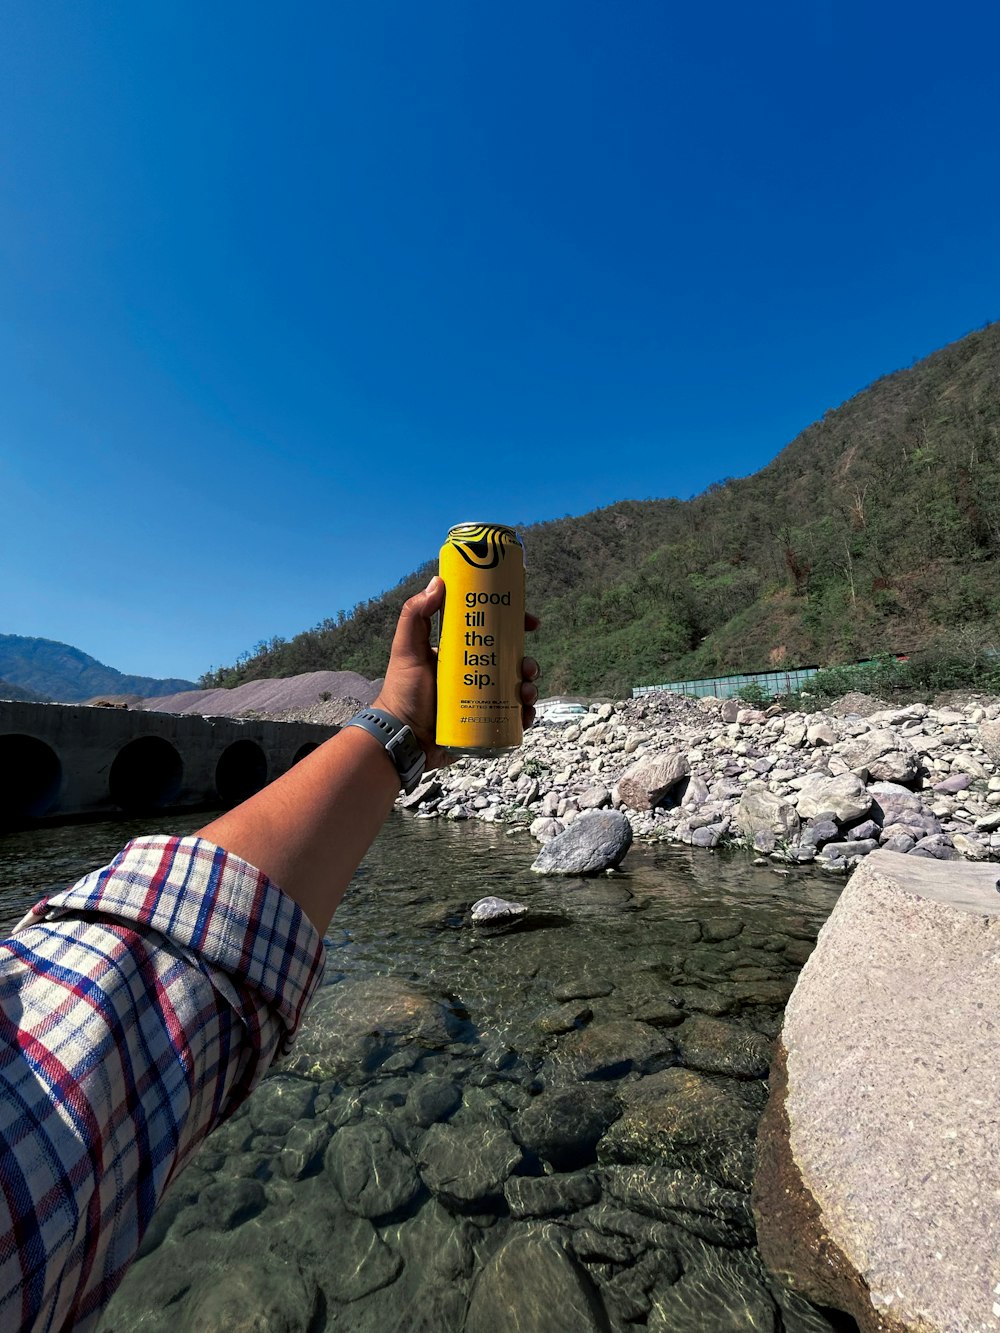 a person is holding a yellow bottle in the water